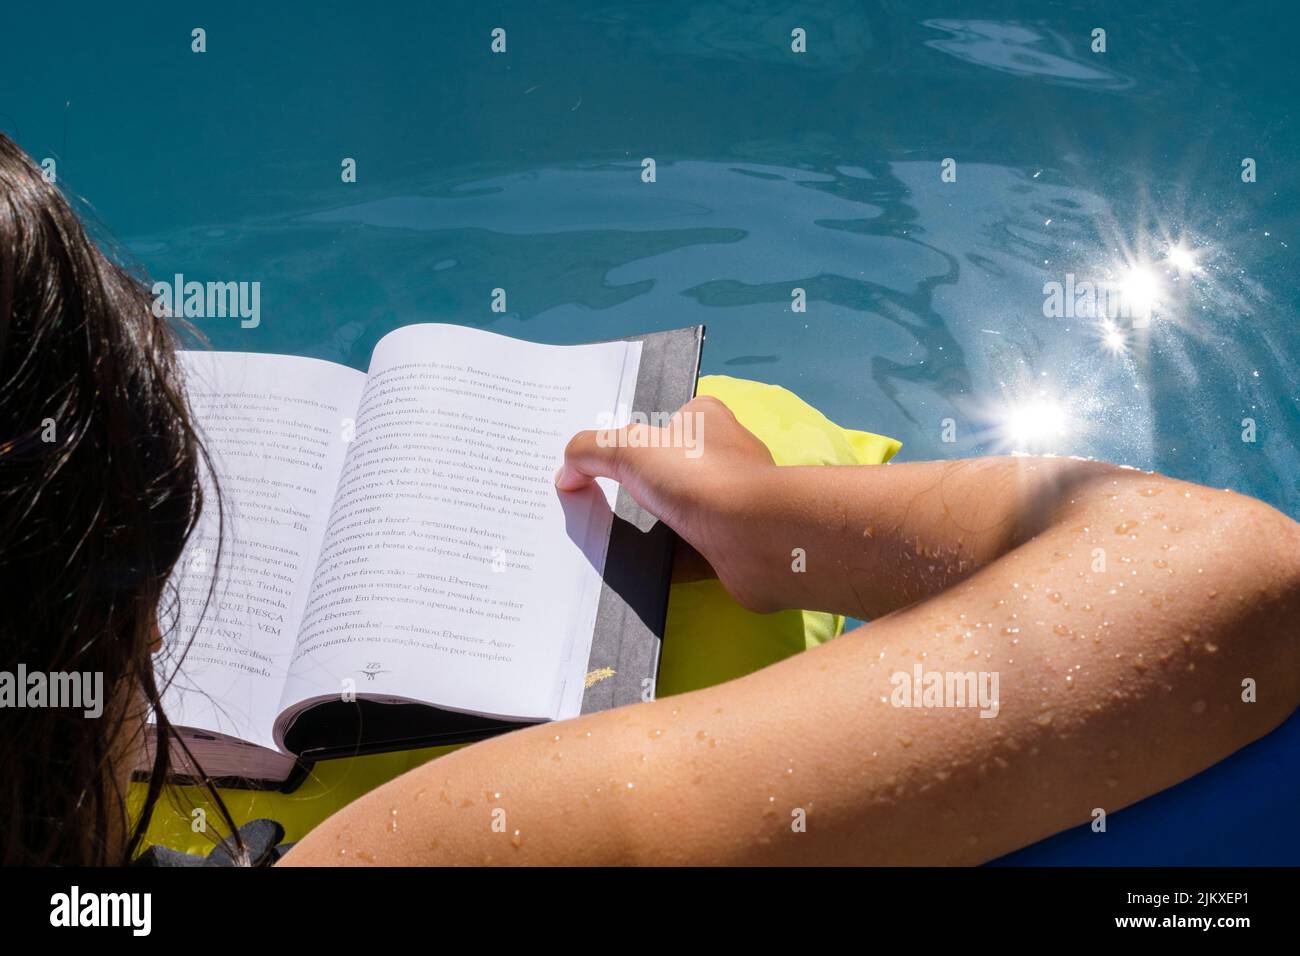 Young girl reading a book while inside a water pool refreshing on summer days. Water sun glare reflexion. Open book, kids reading on hollydays. Stock Photo